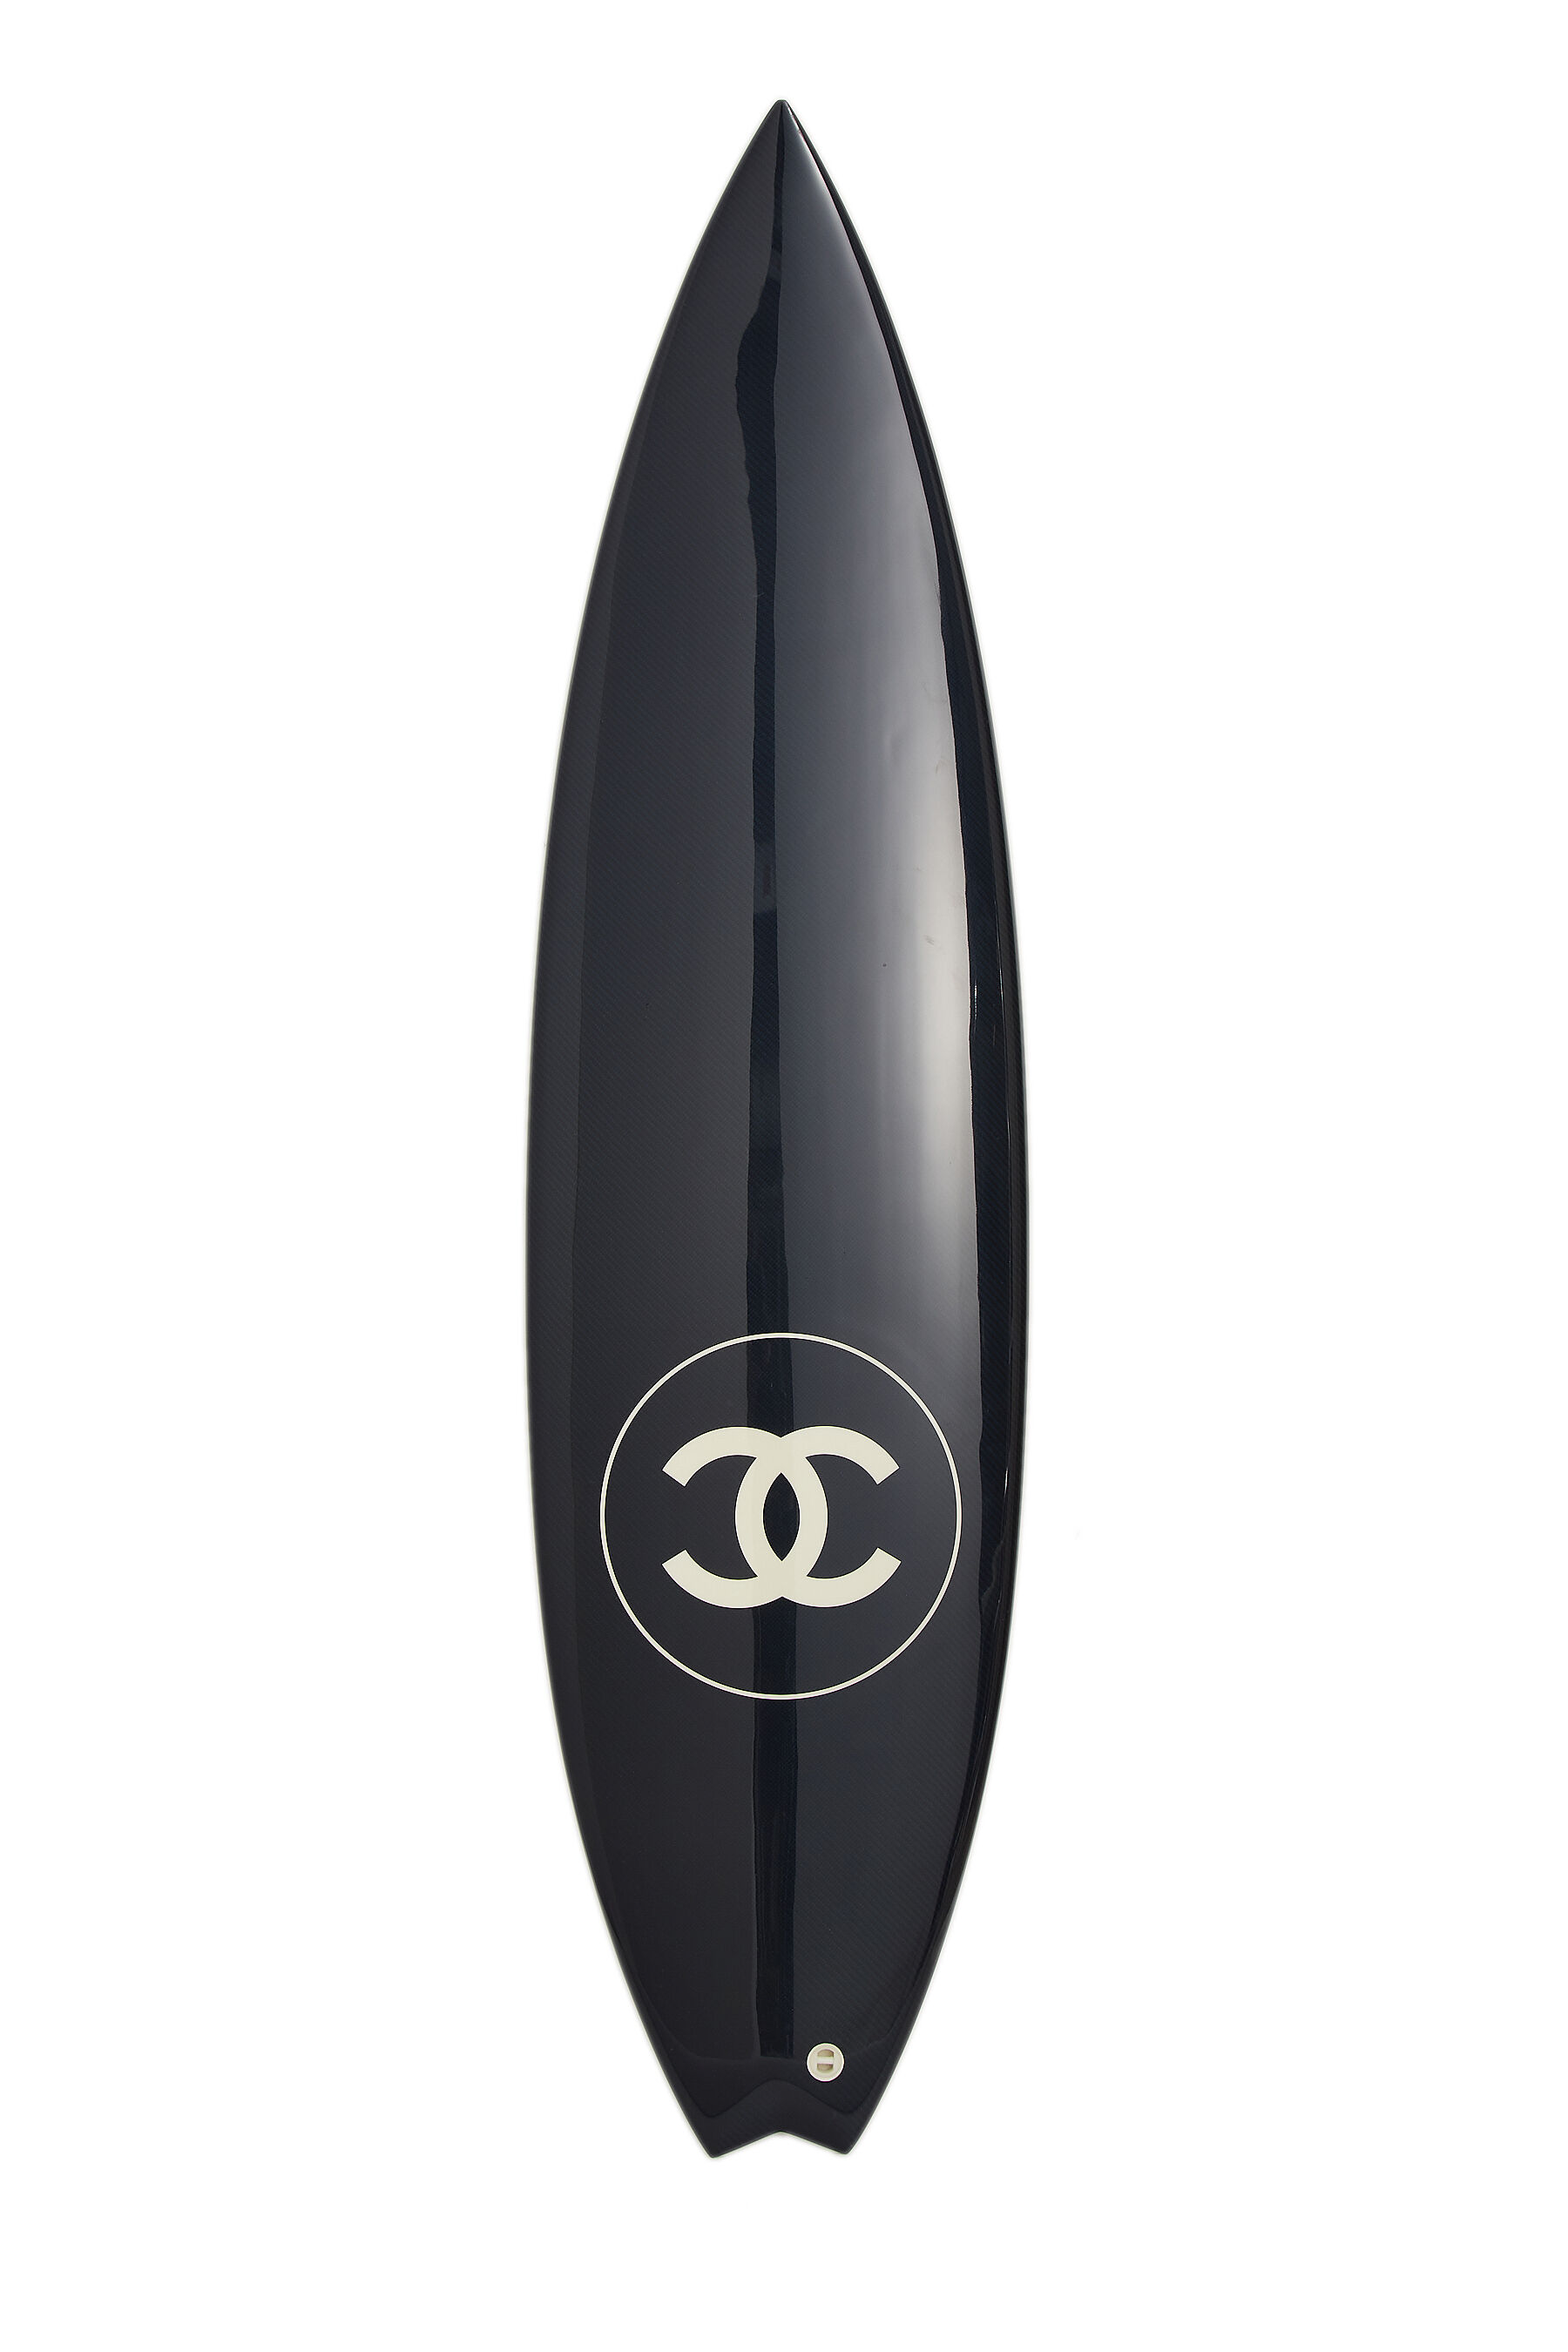 Philippe Barland x Chanel Limited Edition Blue Carbon Surfboard